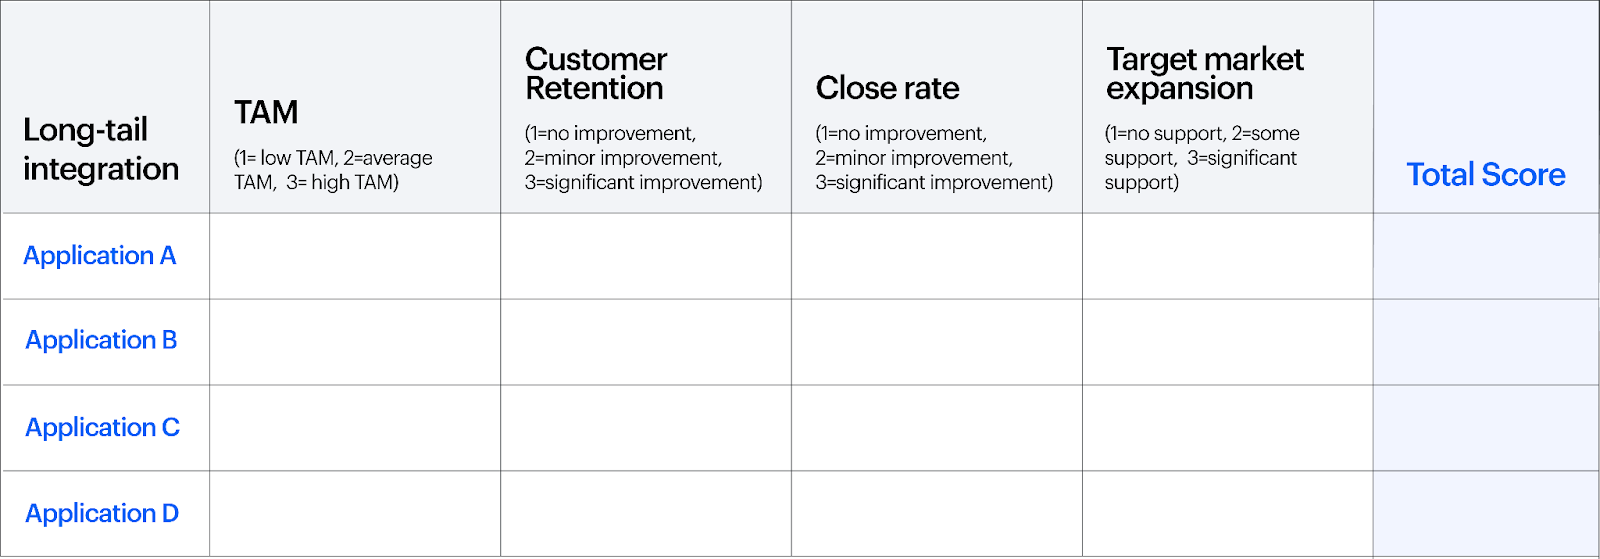 Table for evaluating the ROI of long-tail integrations